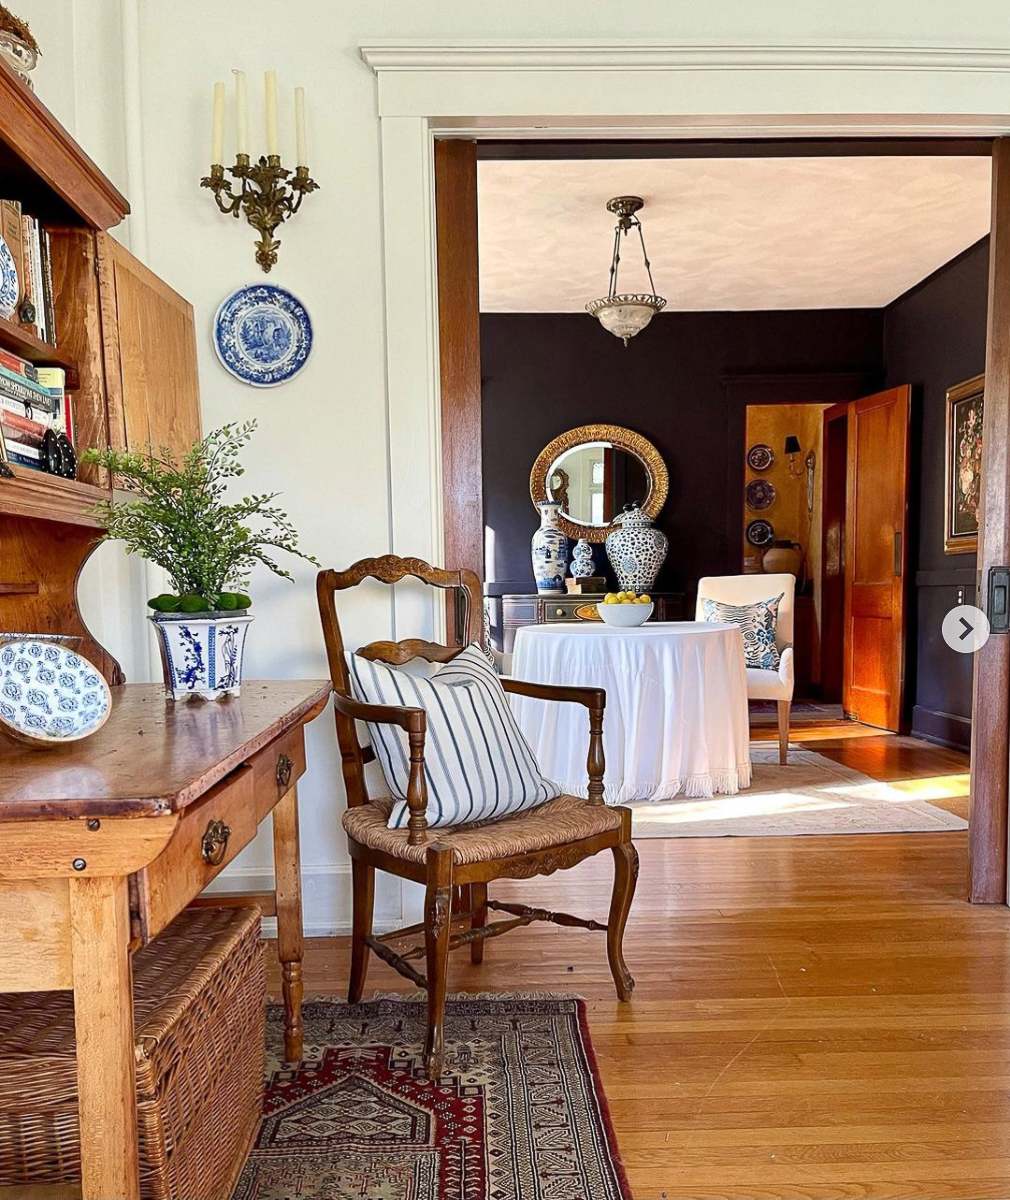 Love this home tour filled with antiques and the dark moody wall paint in the dining room kellyelko.com